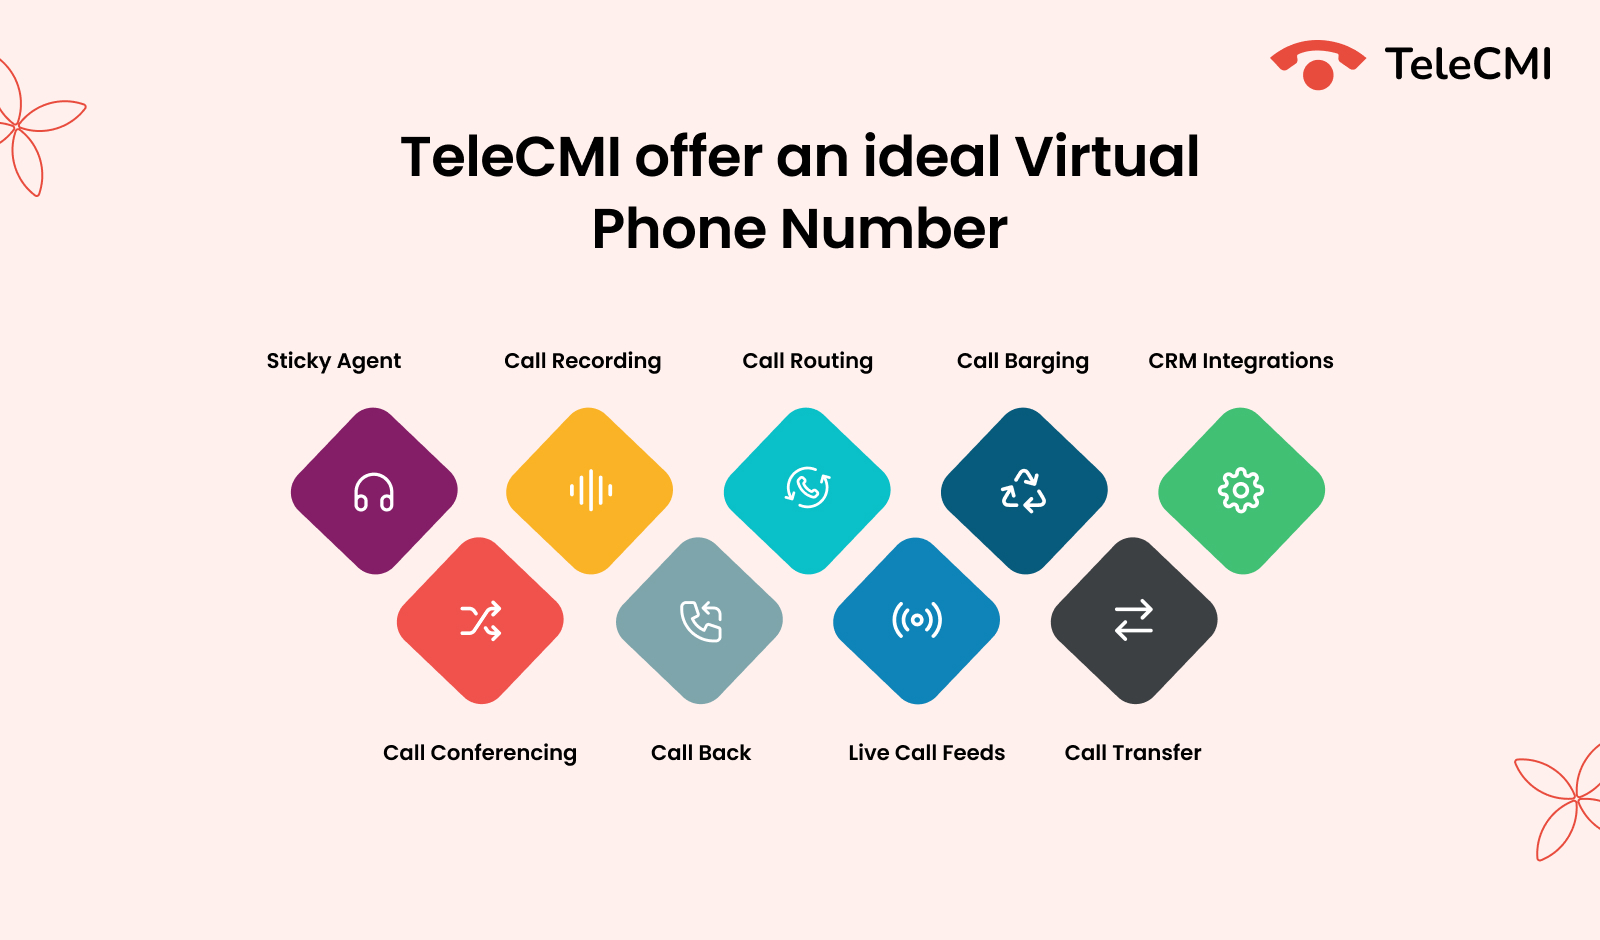 How does TeleCMI offer an ideal Virtual Phone Number with advanced VoIP service?